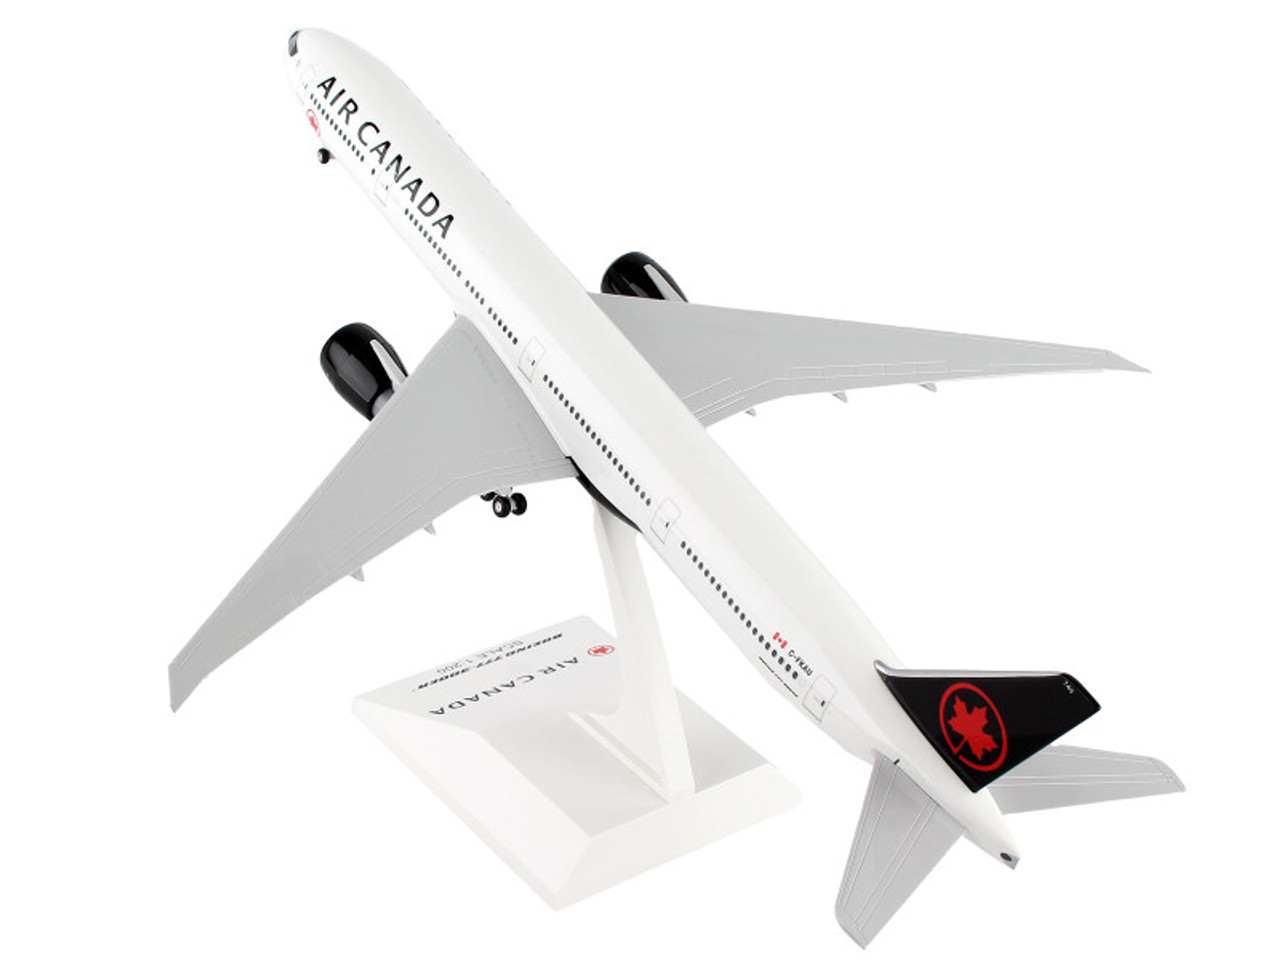 Boeing 777-300ER Commercial Aircraft "Air Canada" (C-FKAU) White with Black Tail (Snap-Fit) 1/200 Plastic Model by Skymarks